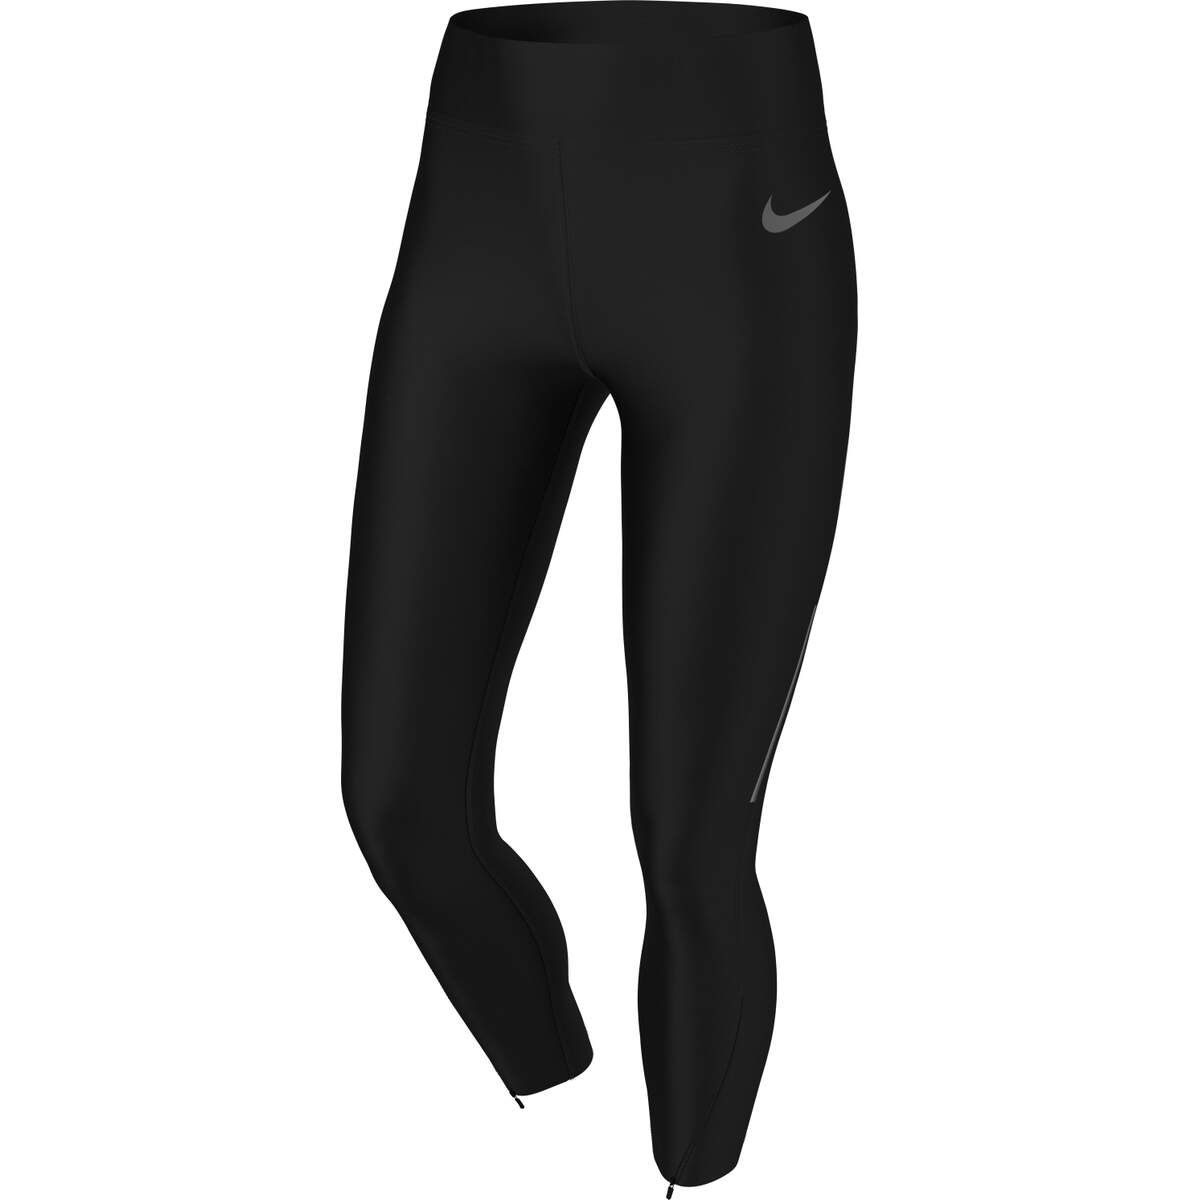 NIKE-EPIC-FASTER-W-7/8-tights-black